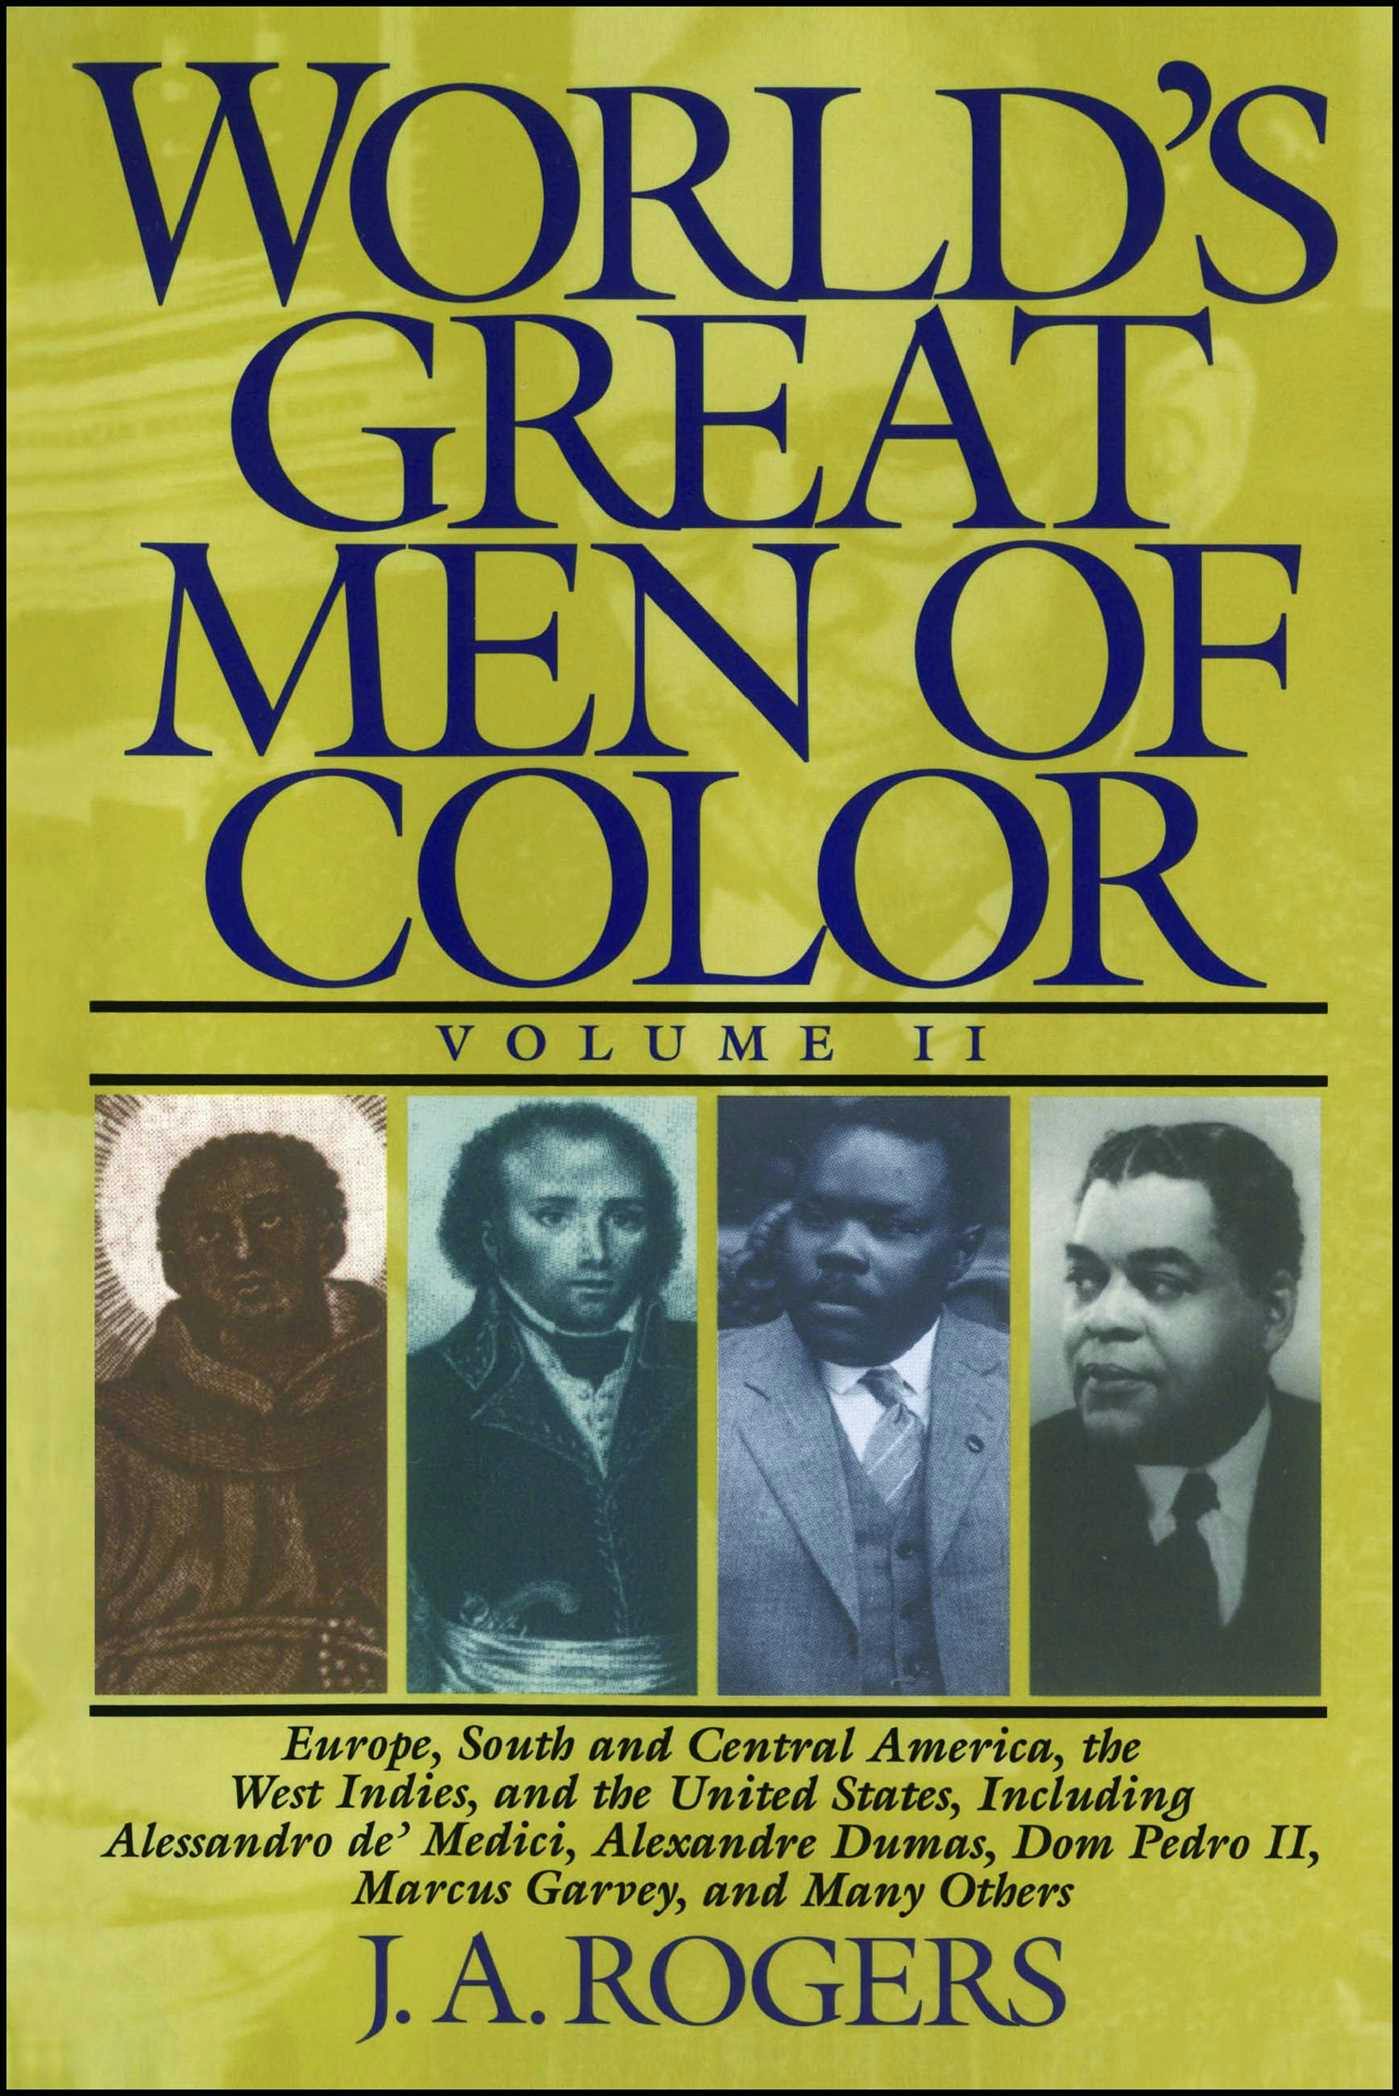 World's Great Men of Color, Volume II - J.A. Rogers